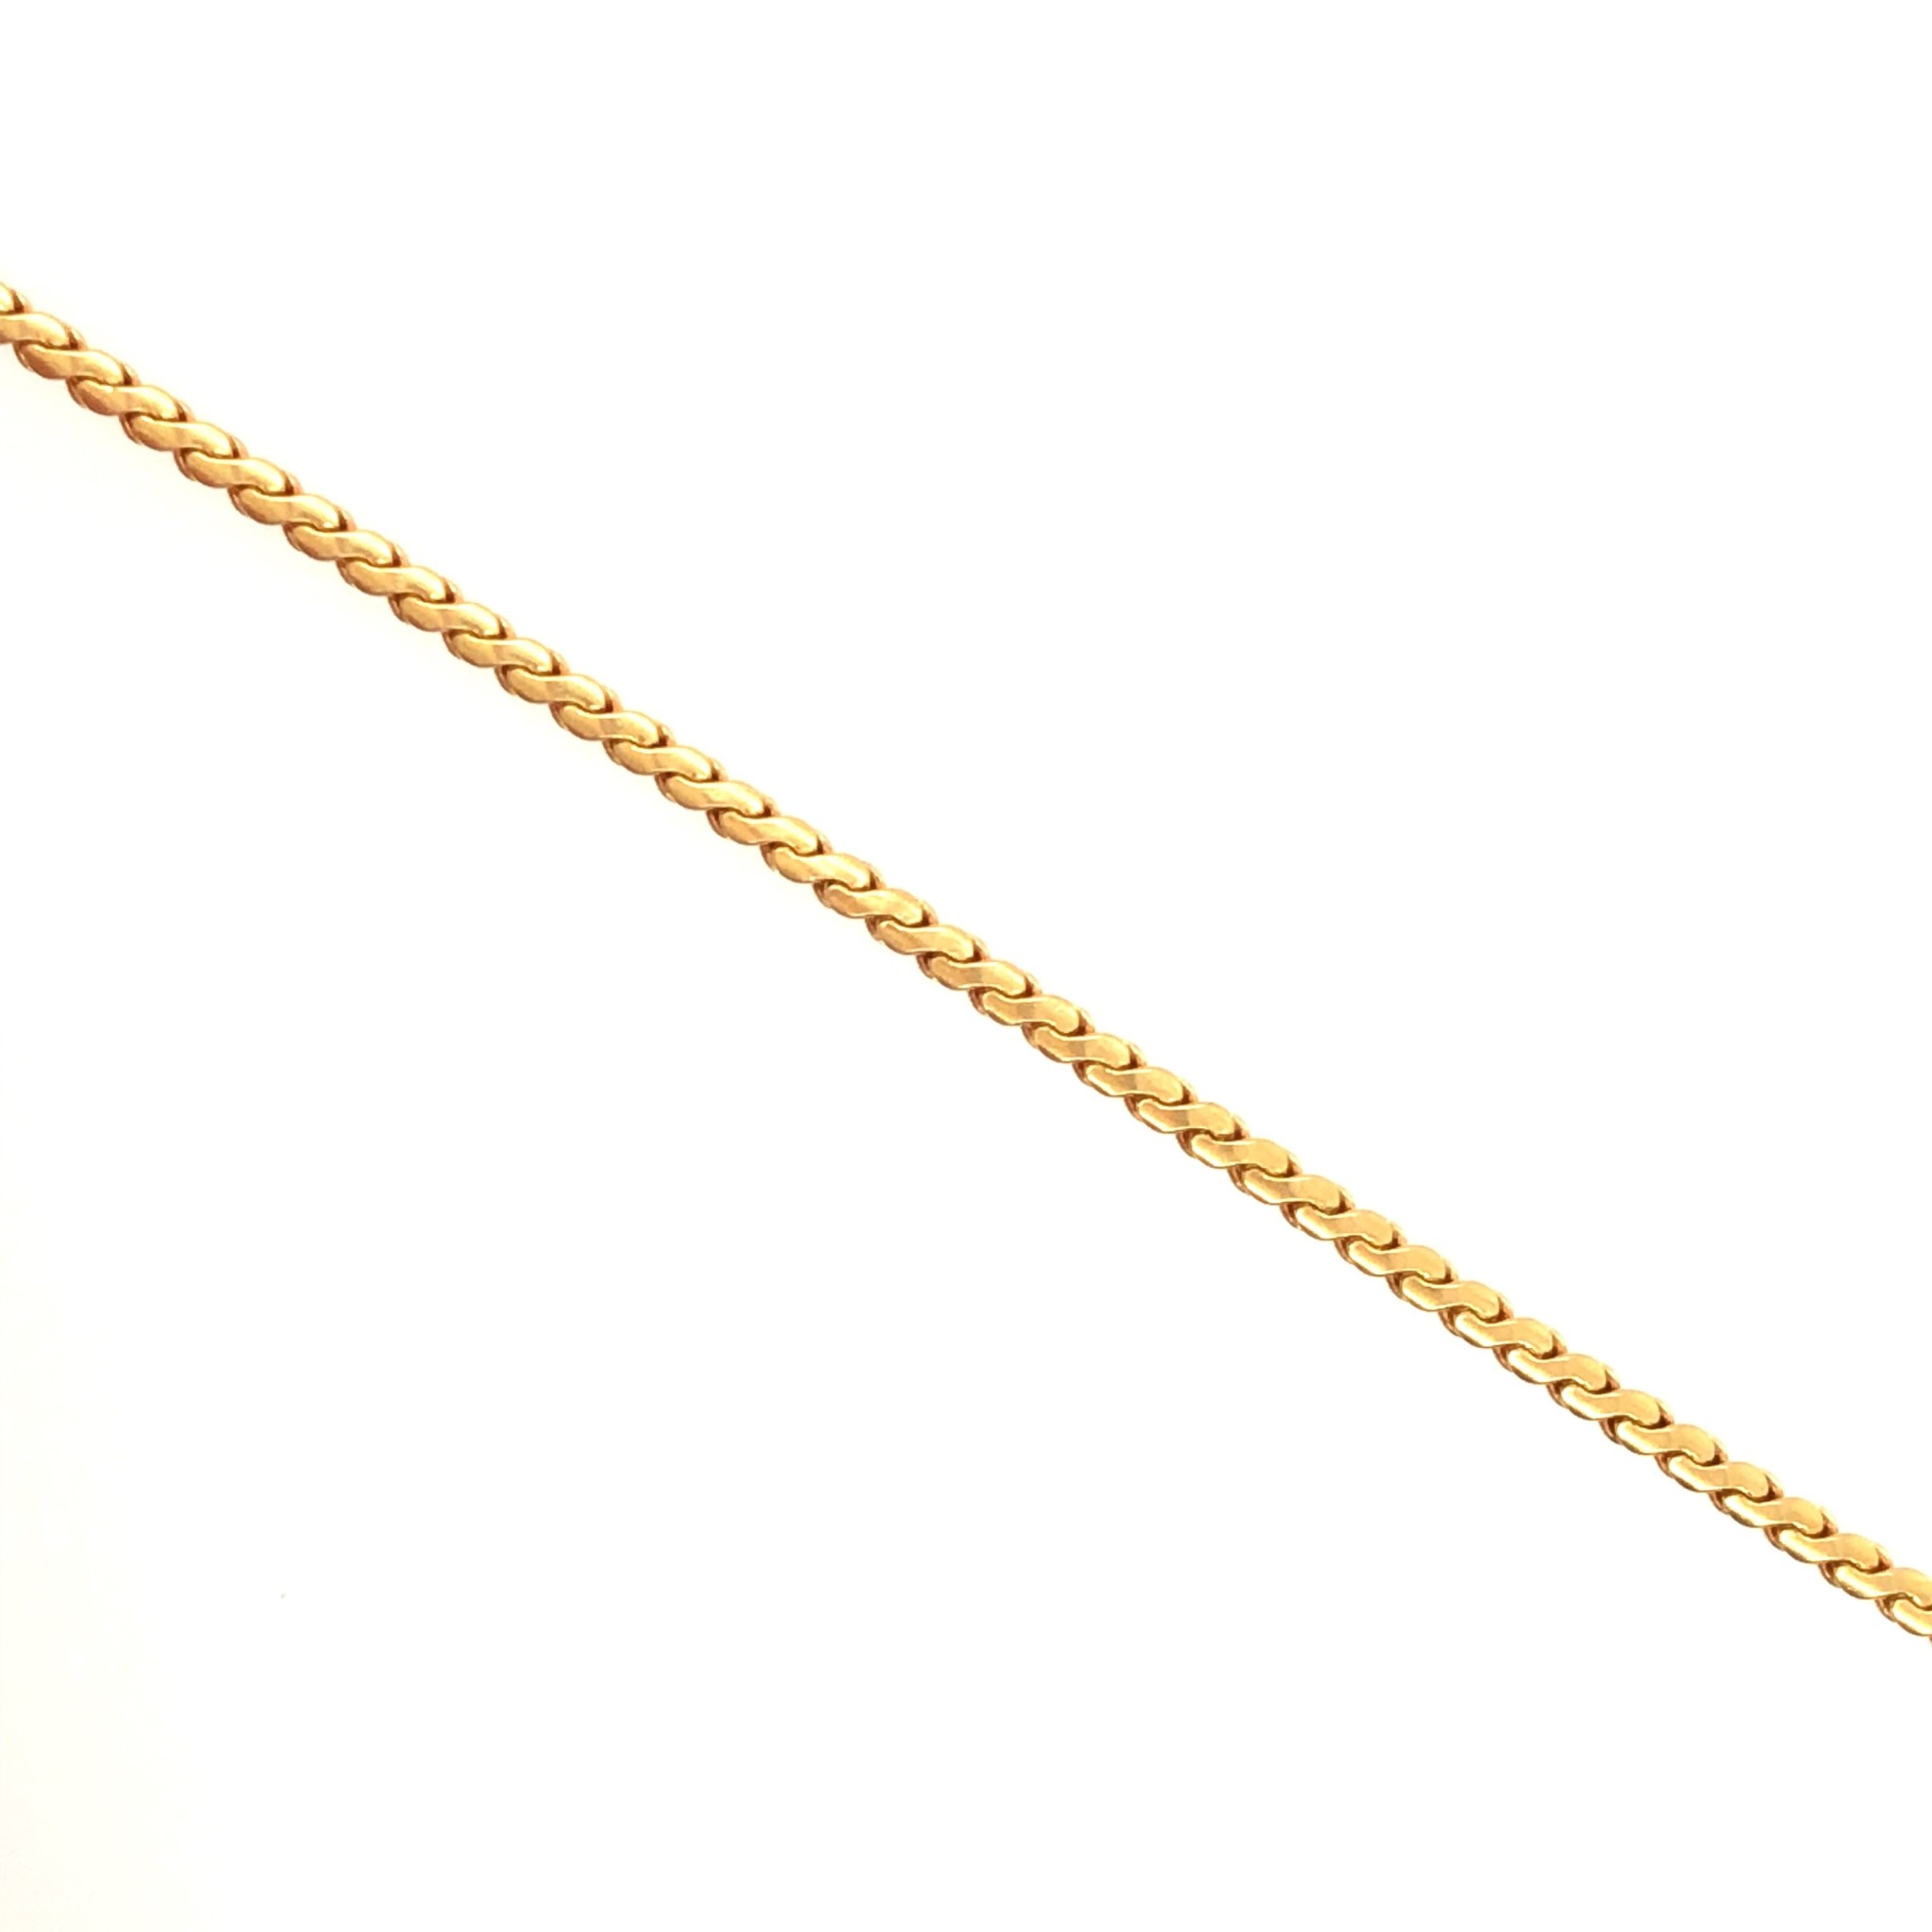 50126 18K YELLOW GOLD 21" S LINK CHAIN 3MM